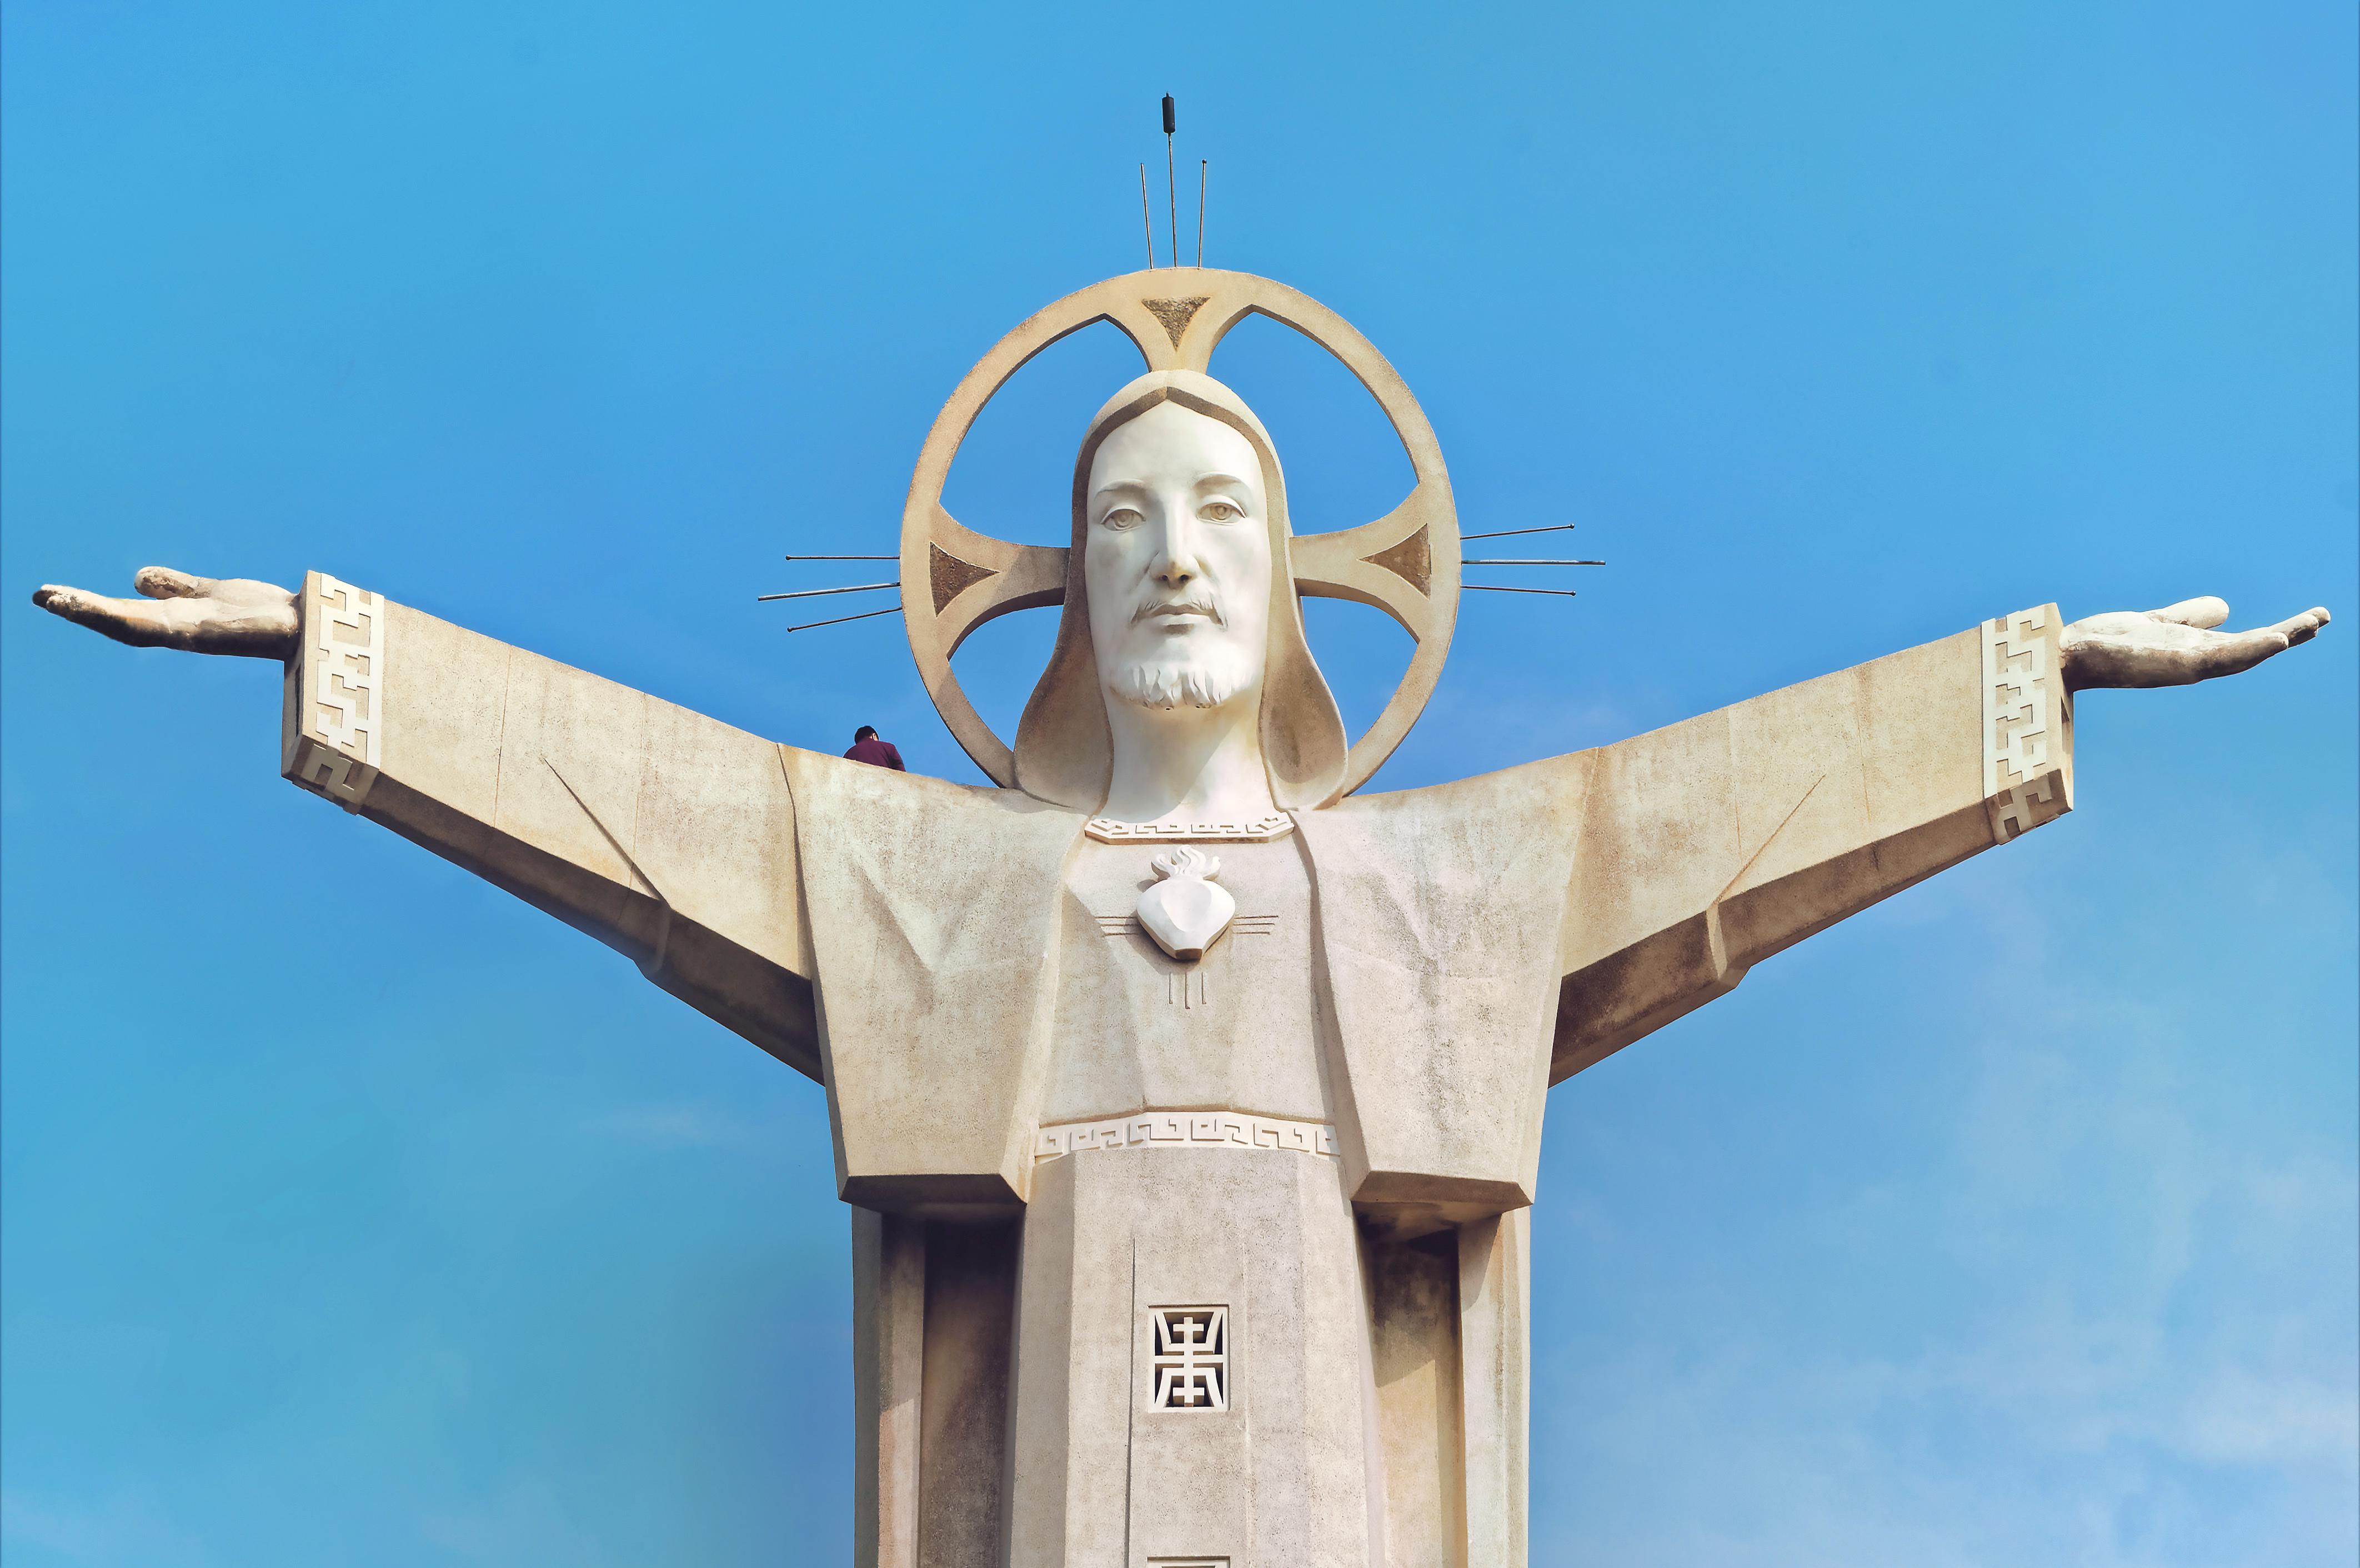 Witness the grandeur of our Jesus Christ Statue that towers over everything within sight. Its magnificence and divinity attract people from all walks of life, who come here to seek blessings and rejoice in its serene ambiance.